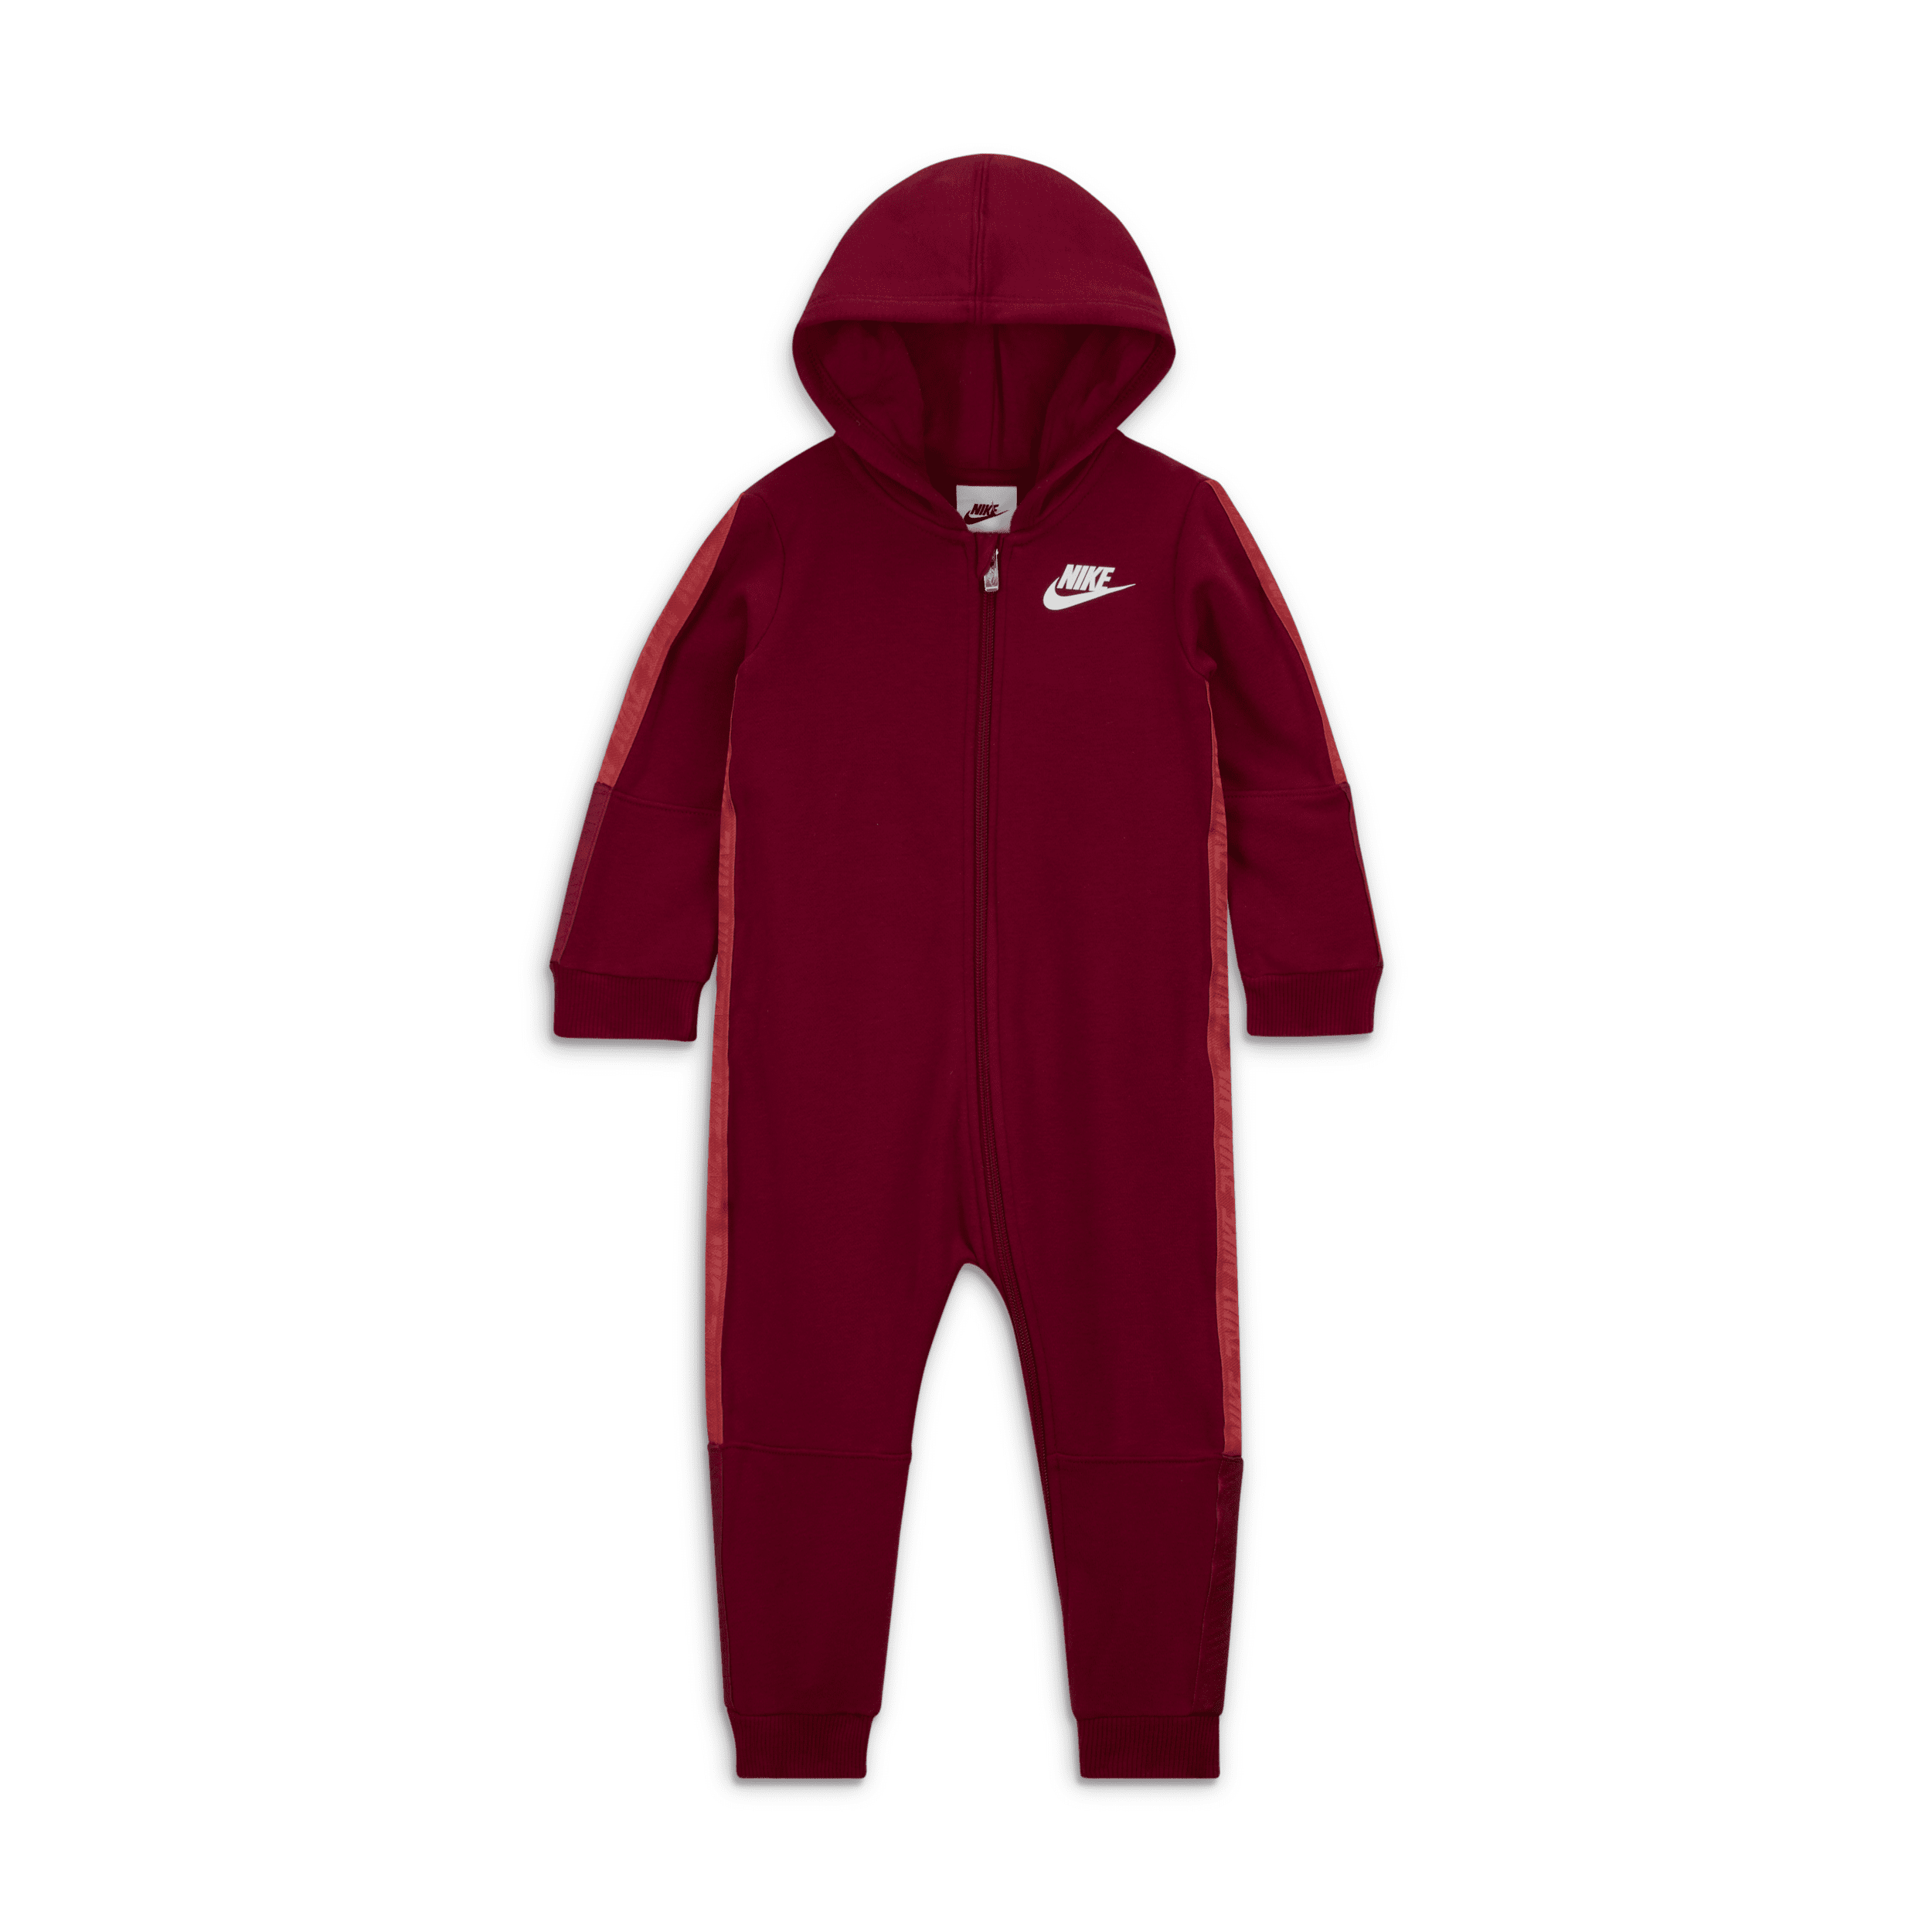 Nike Sportswear Taping Hooded Coverall Baby Coverall In Red